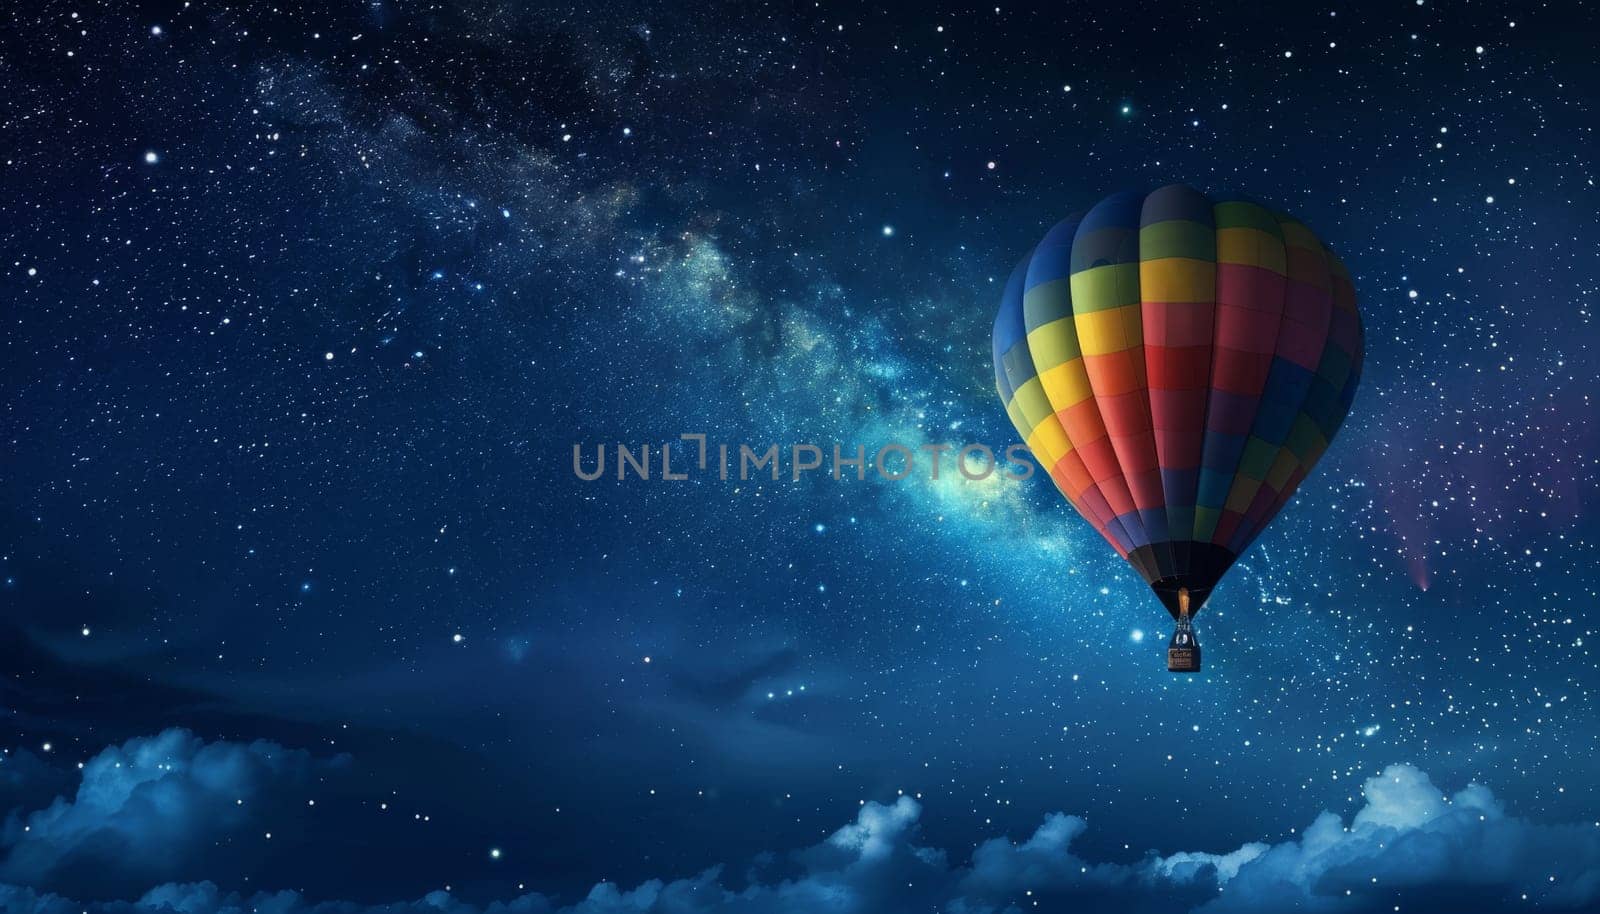 A colorful hot air balloon is floating in the sky above a starry night by AI generated image.